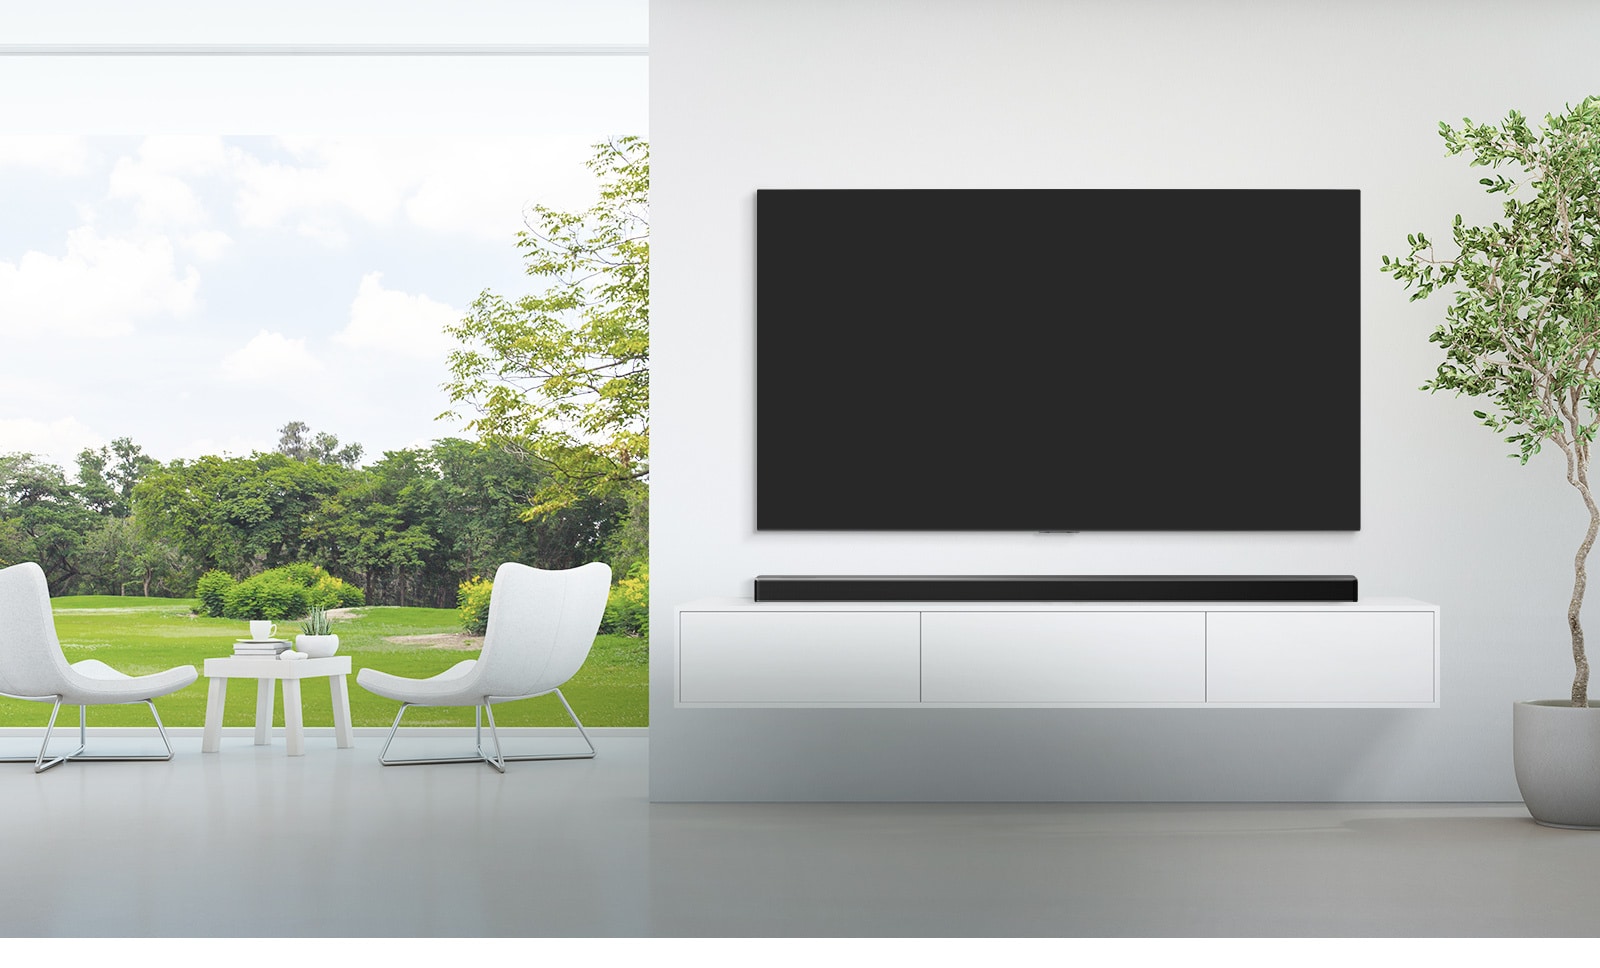 LG Sound Bars - Designed with the Environment in Mind